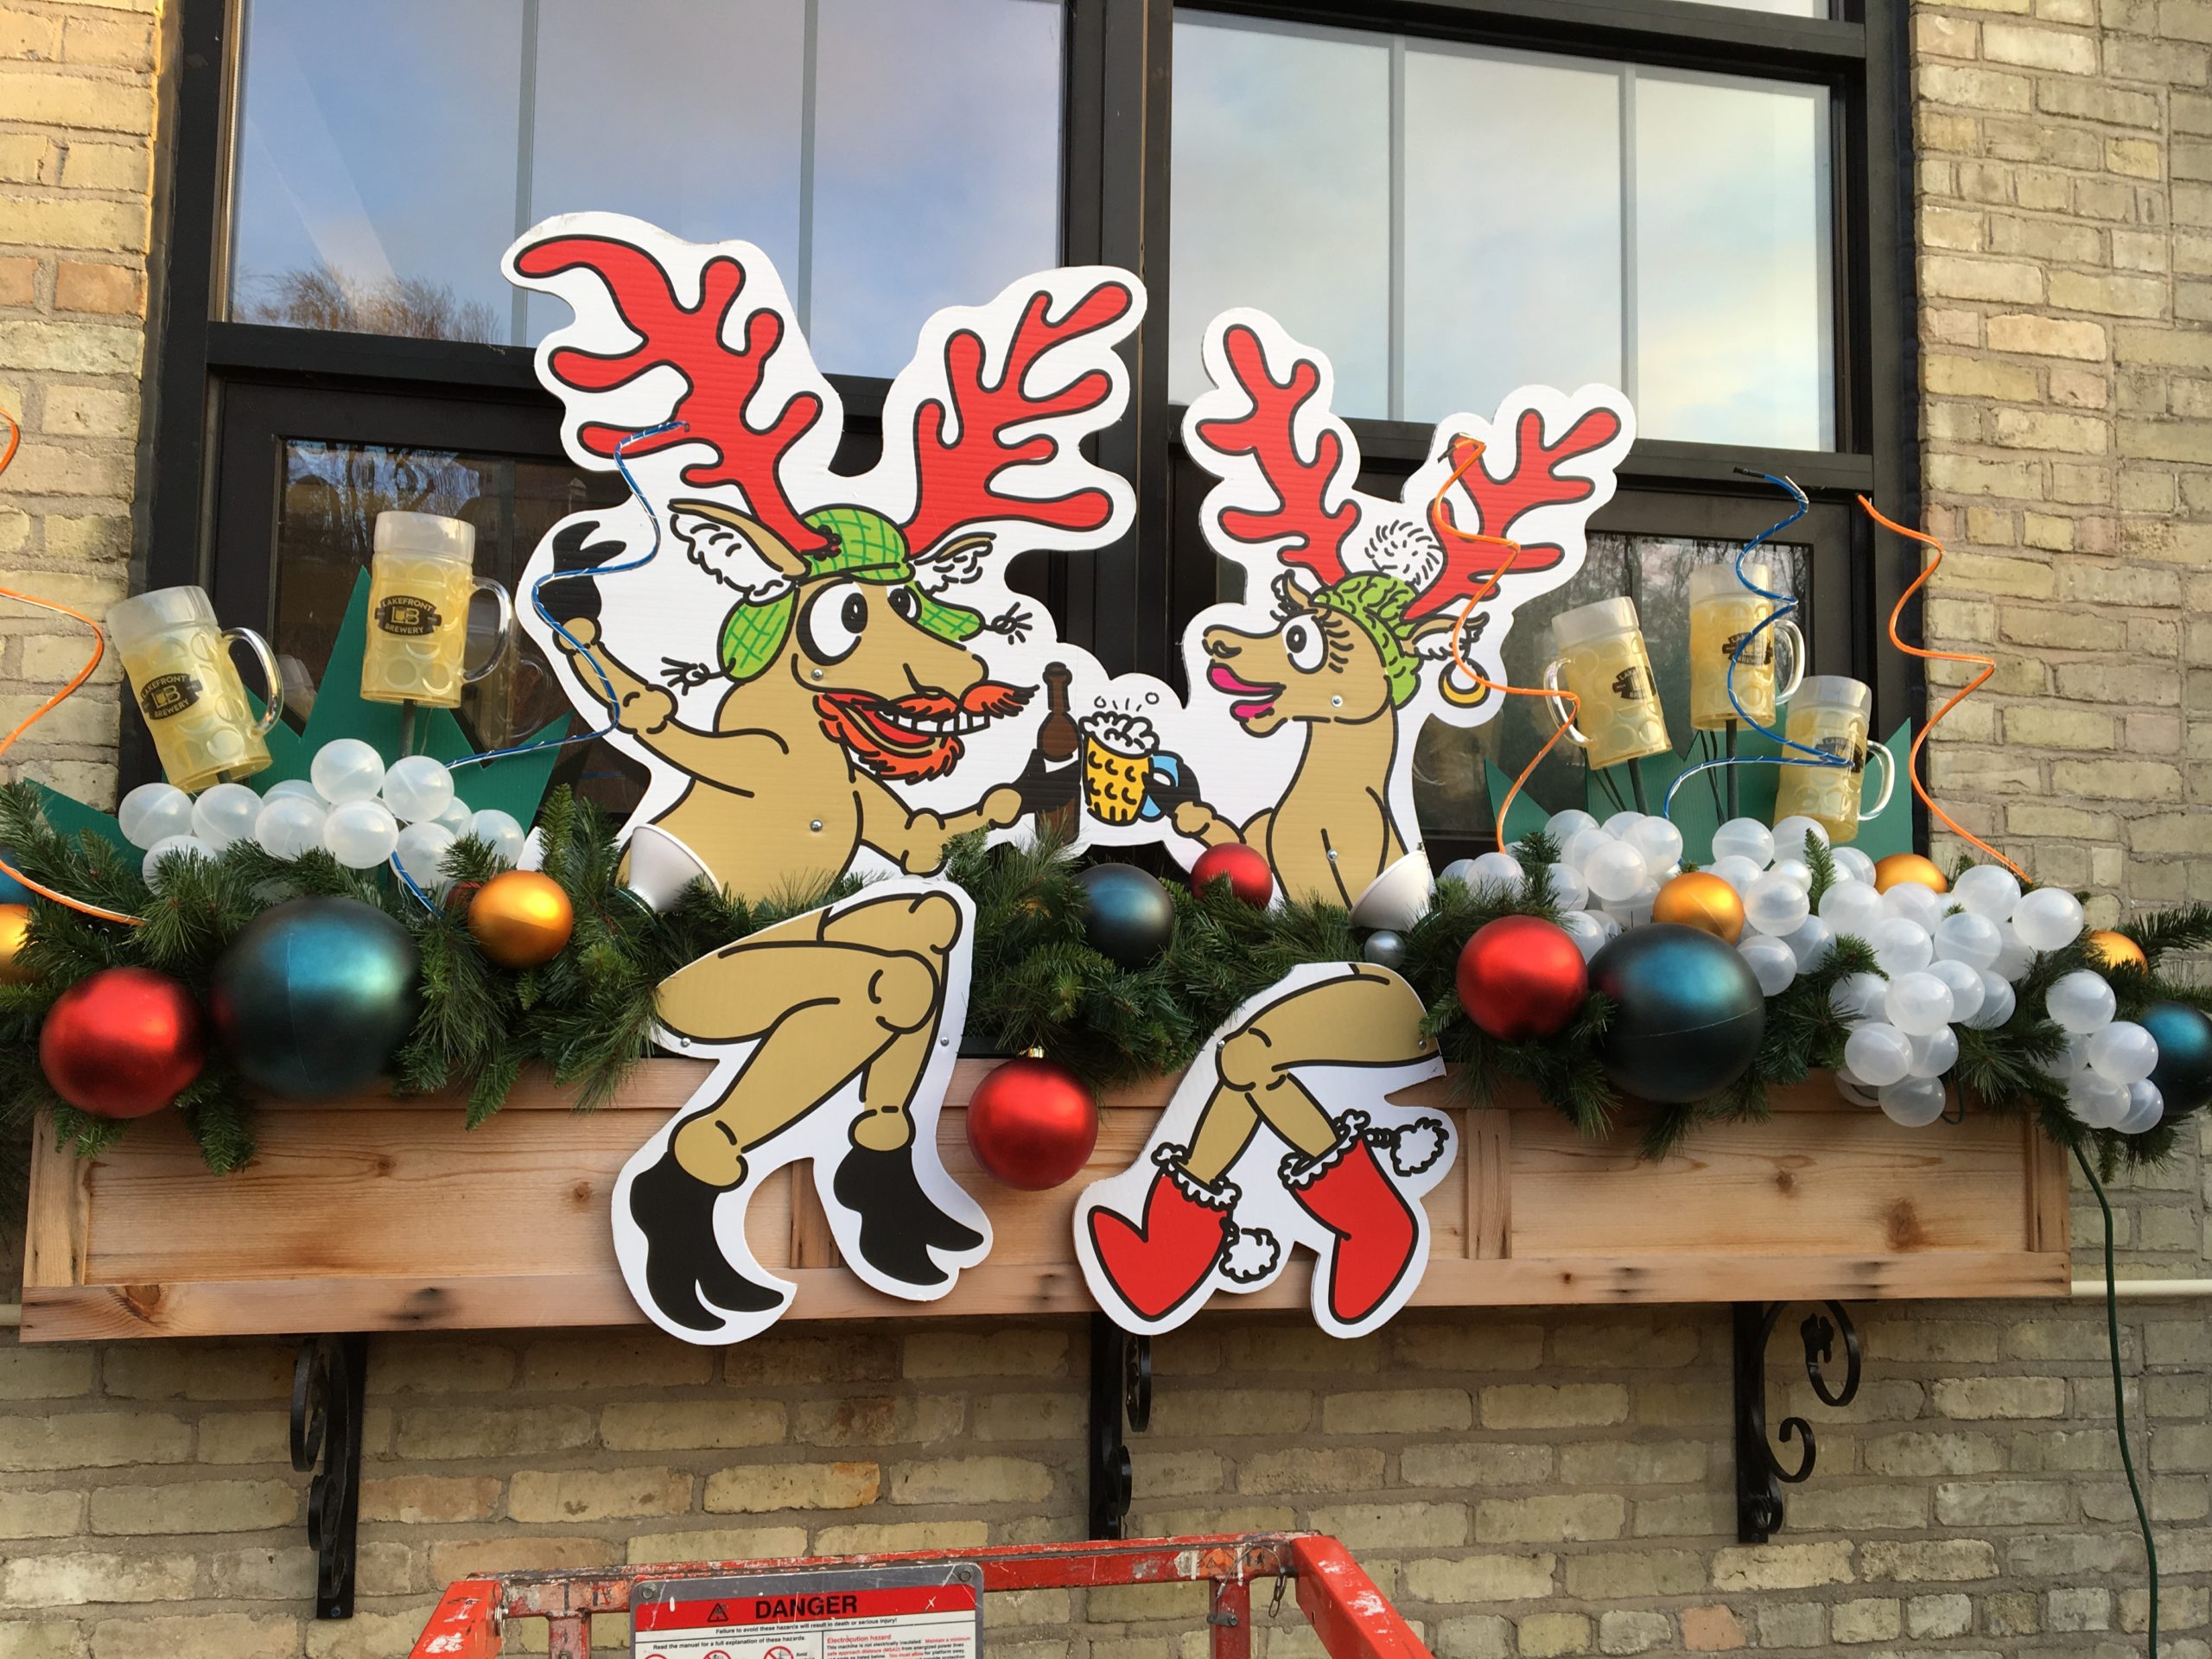 lakefront brewery window boxes